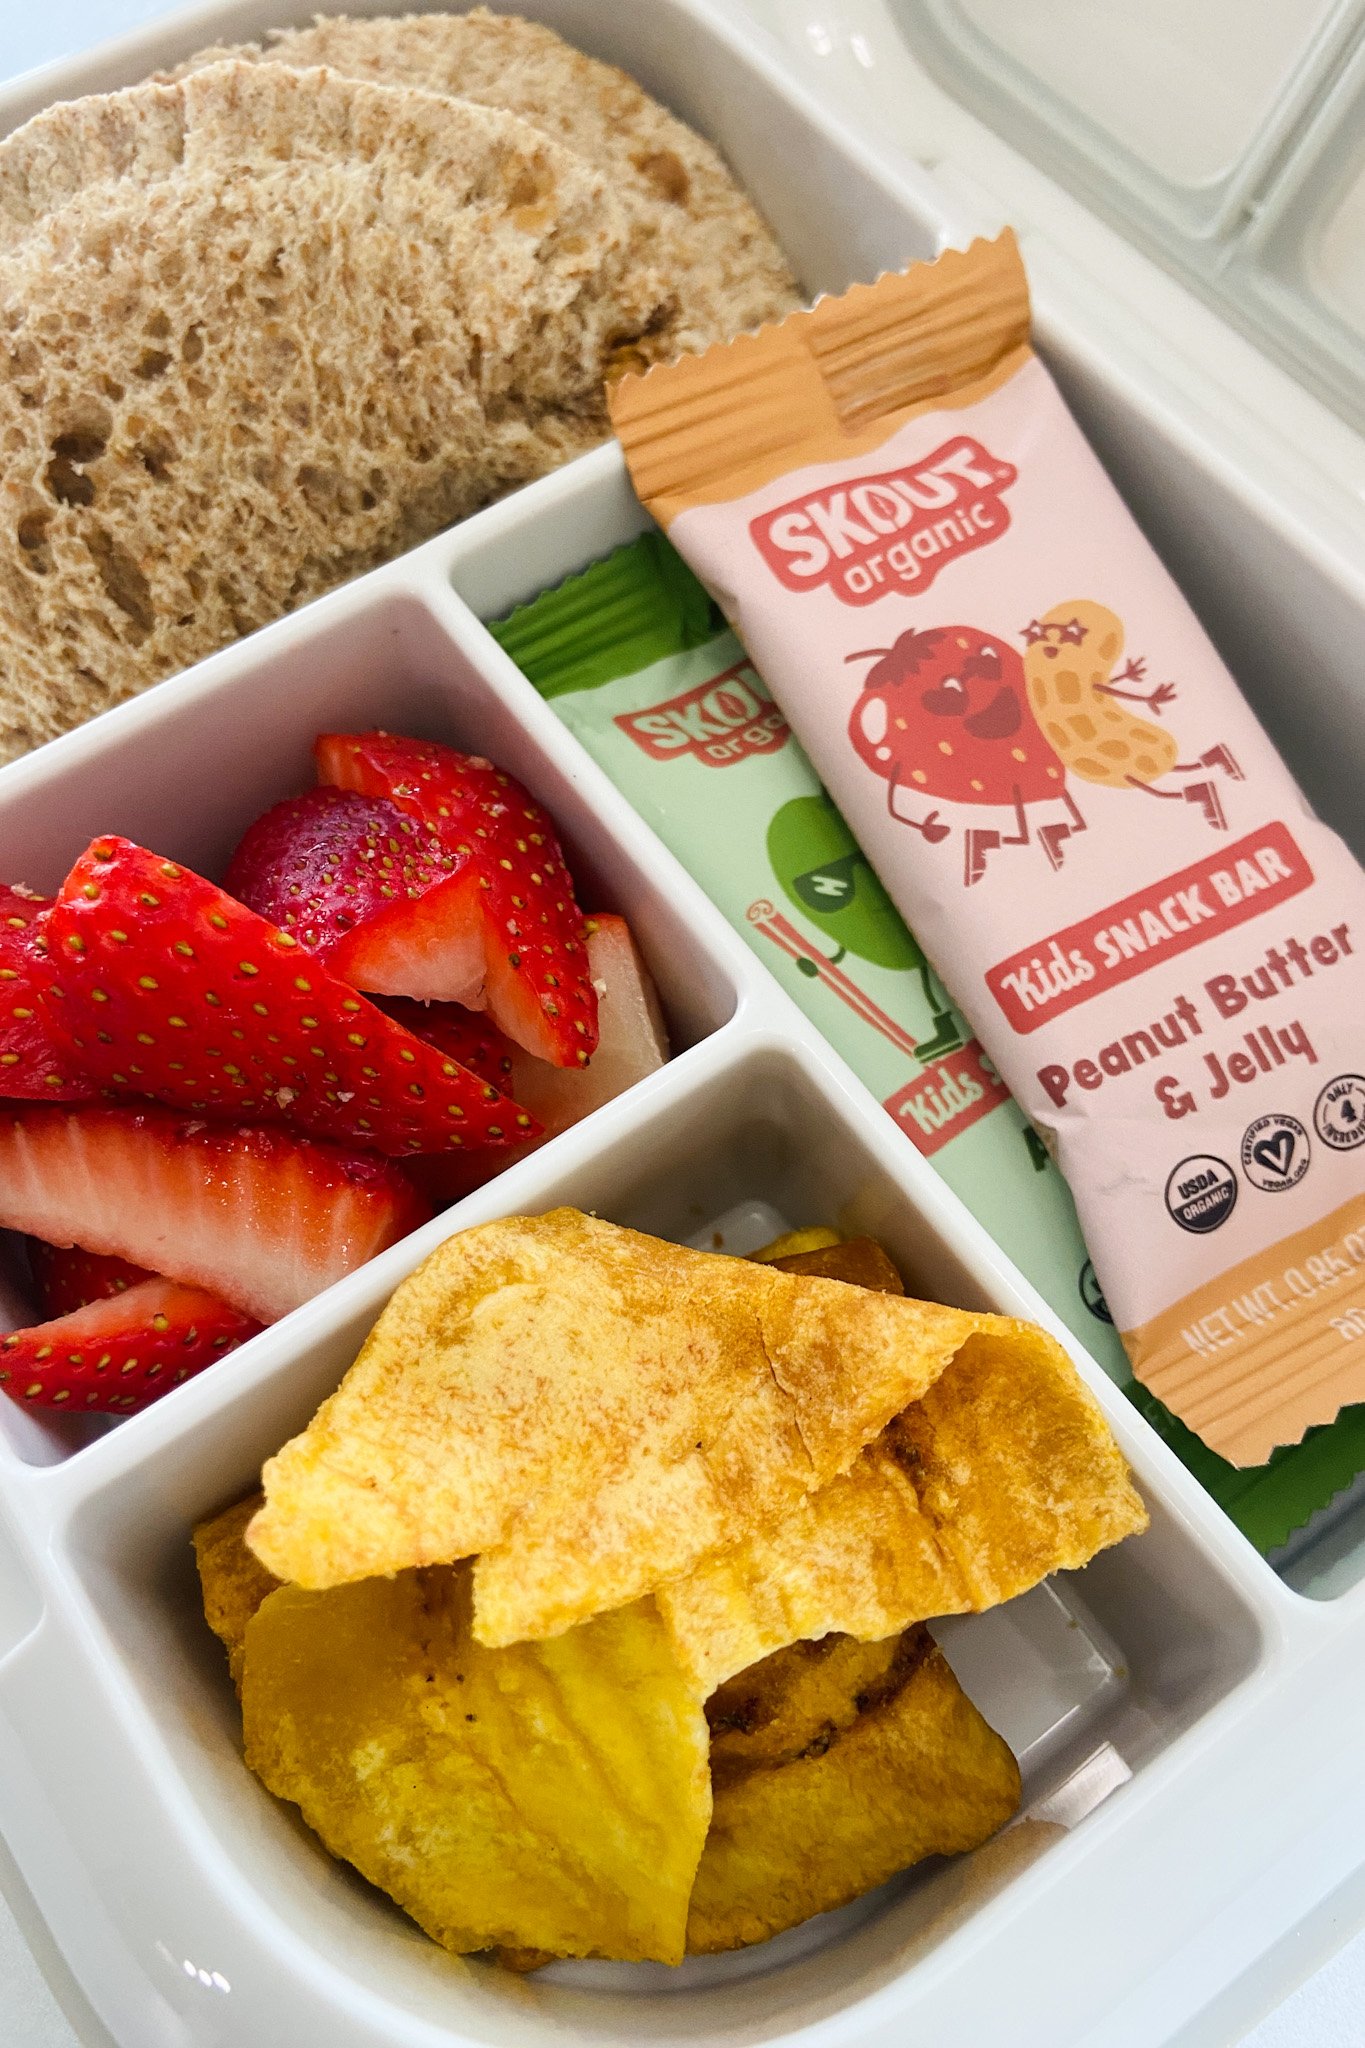 Toddler snack ideas lunchbox.